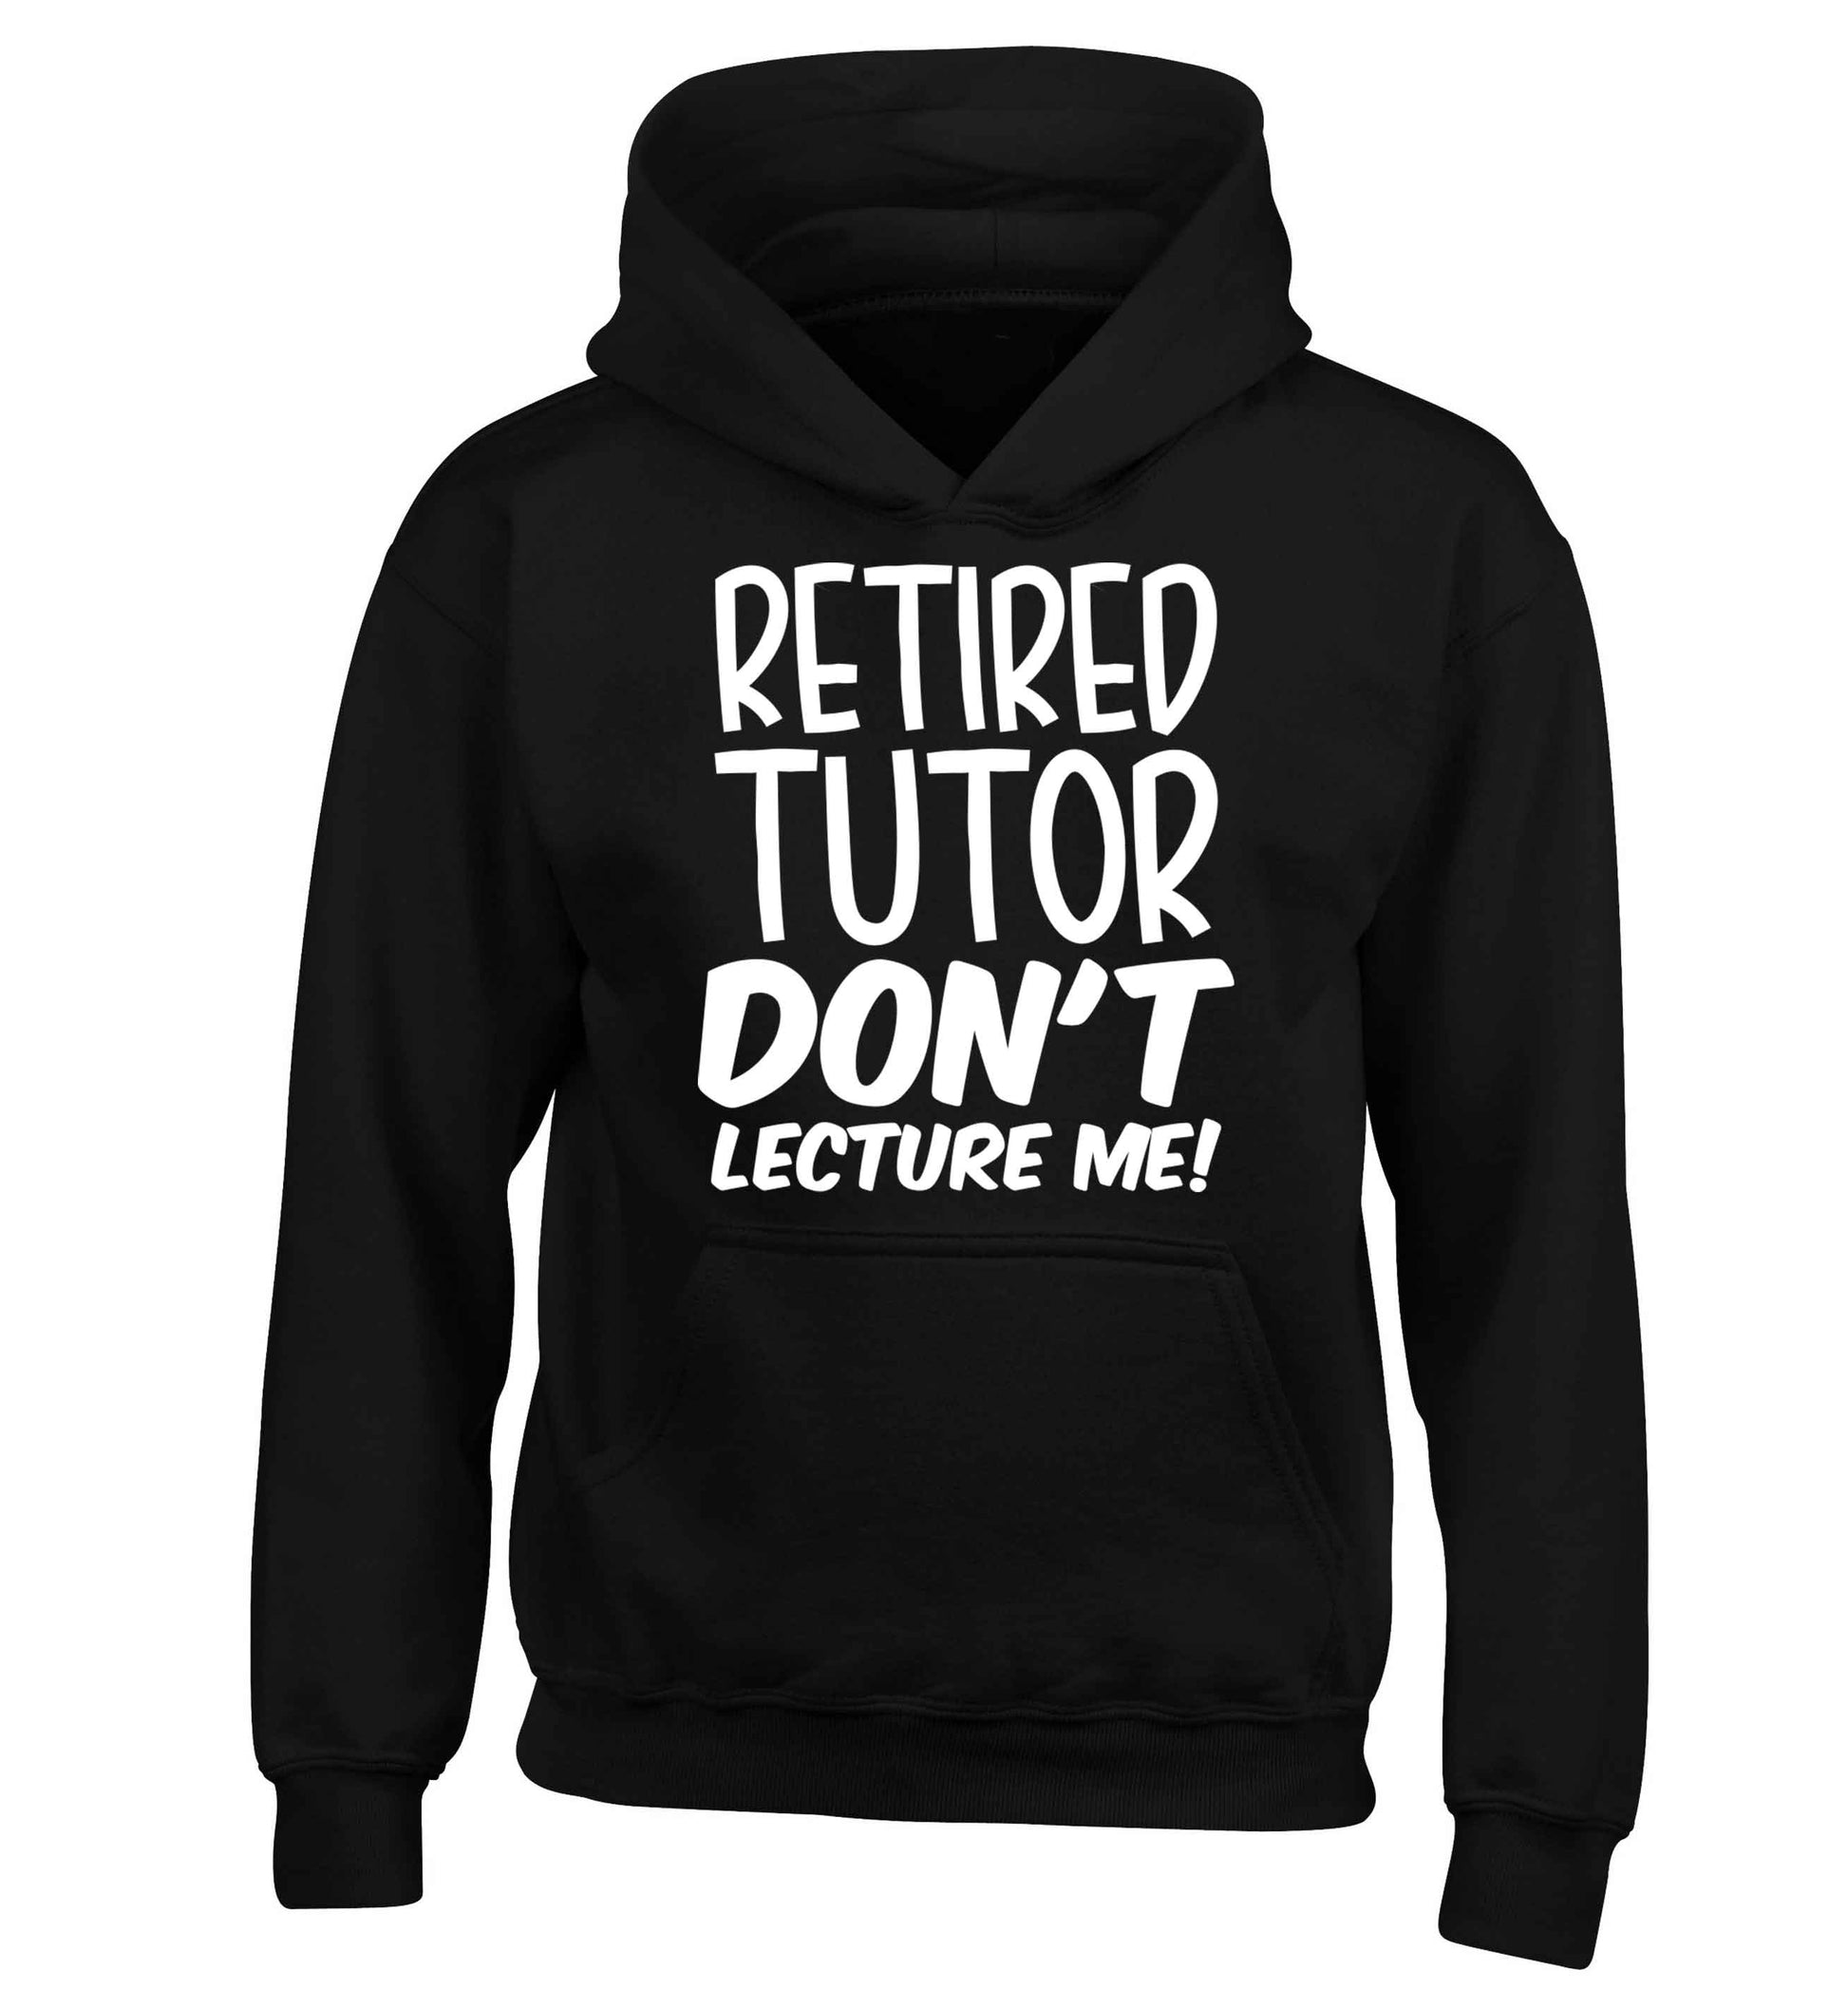 Retired tutor don't lecture me! children's black hoodie 12-13 Years